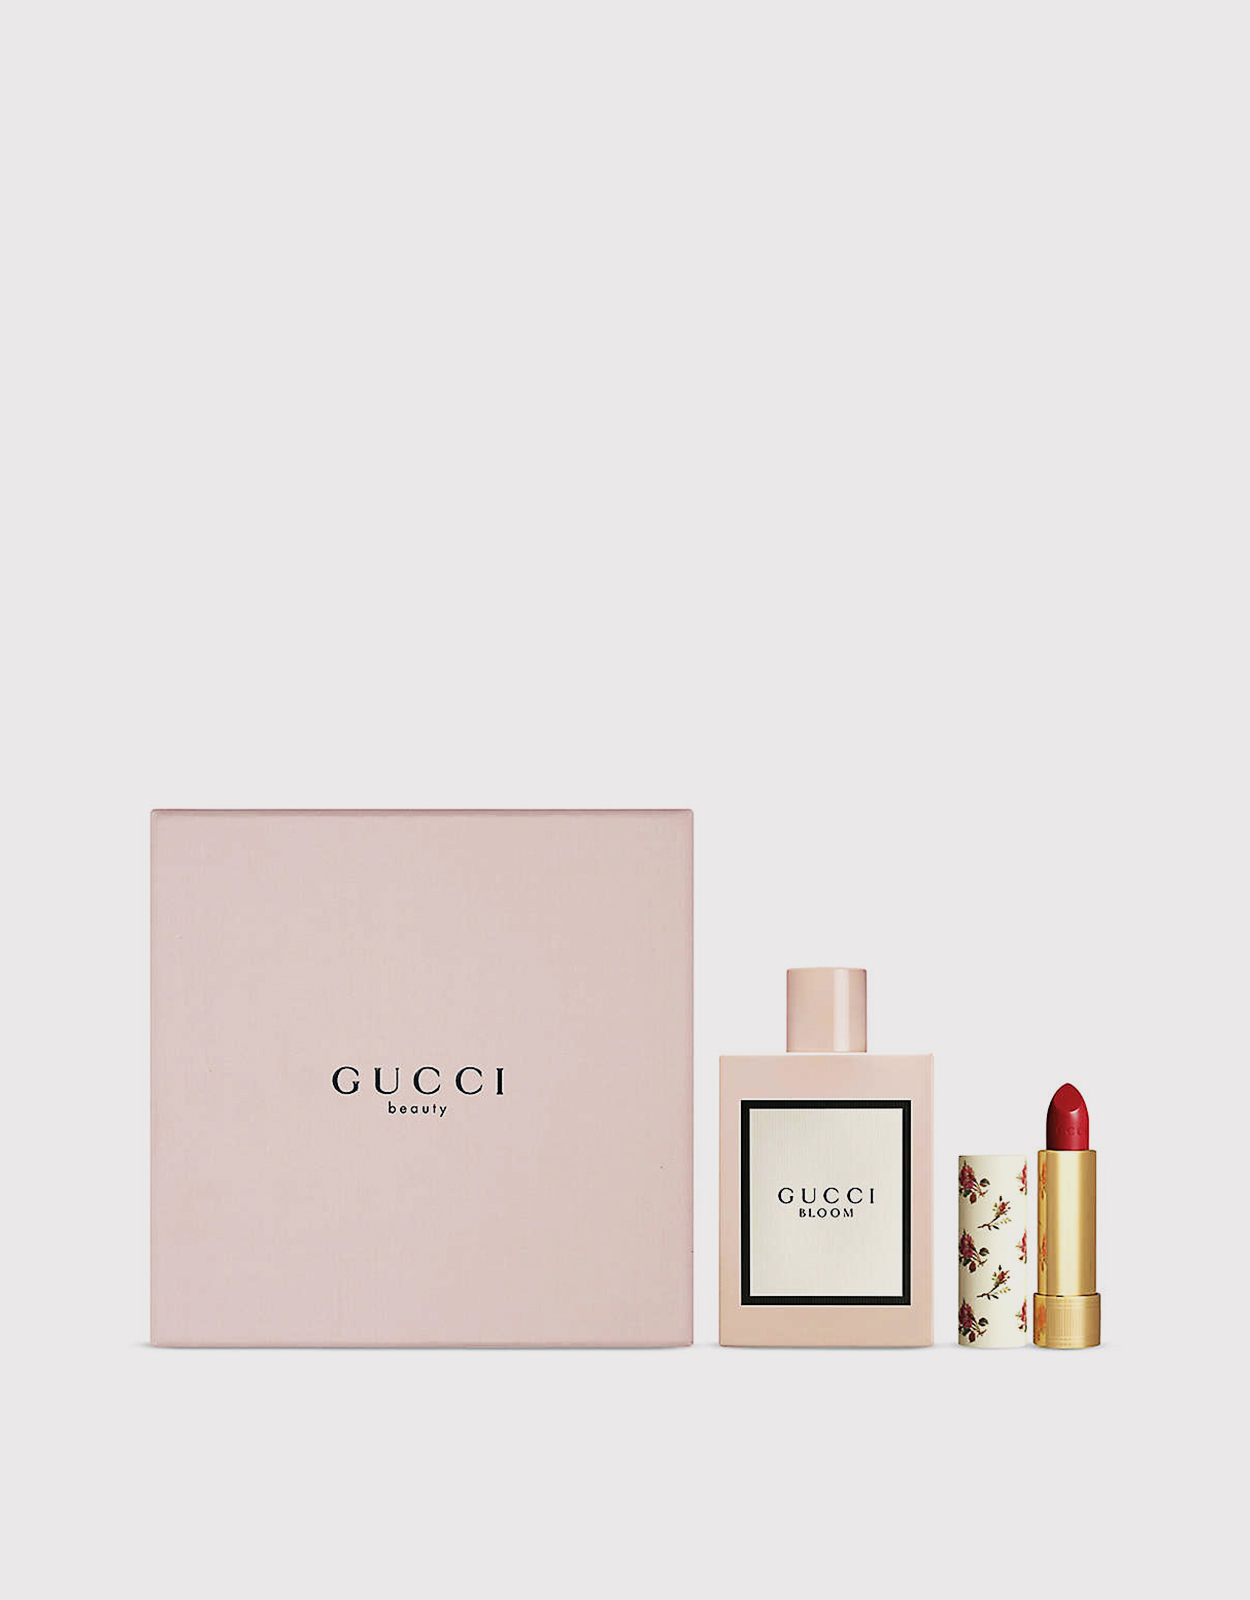 Gucci Beauty Perfume Set Outlet, 59% OFF 